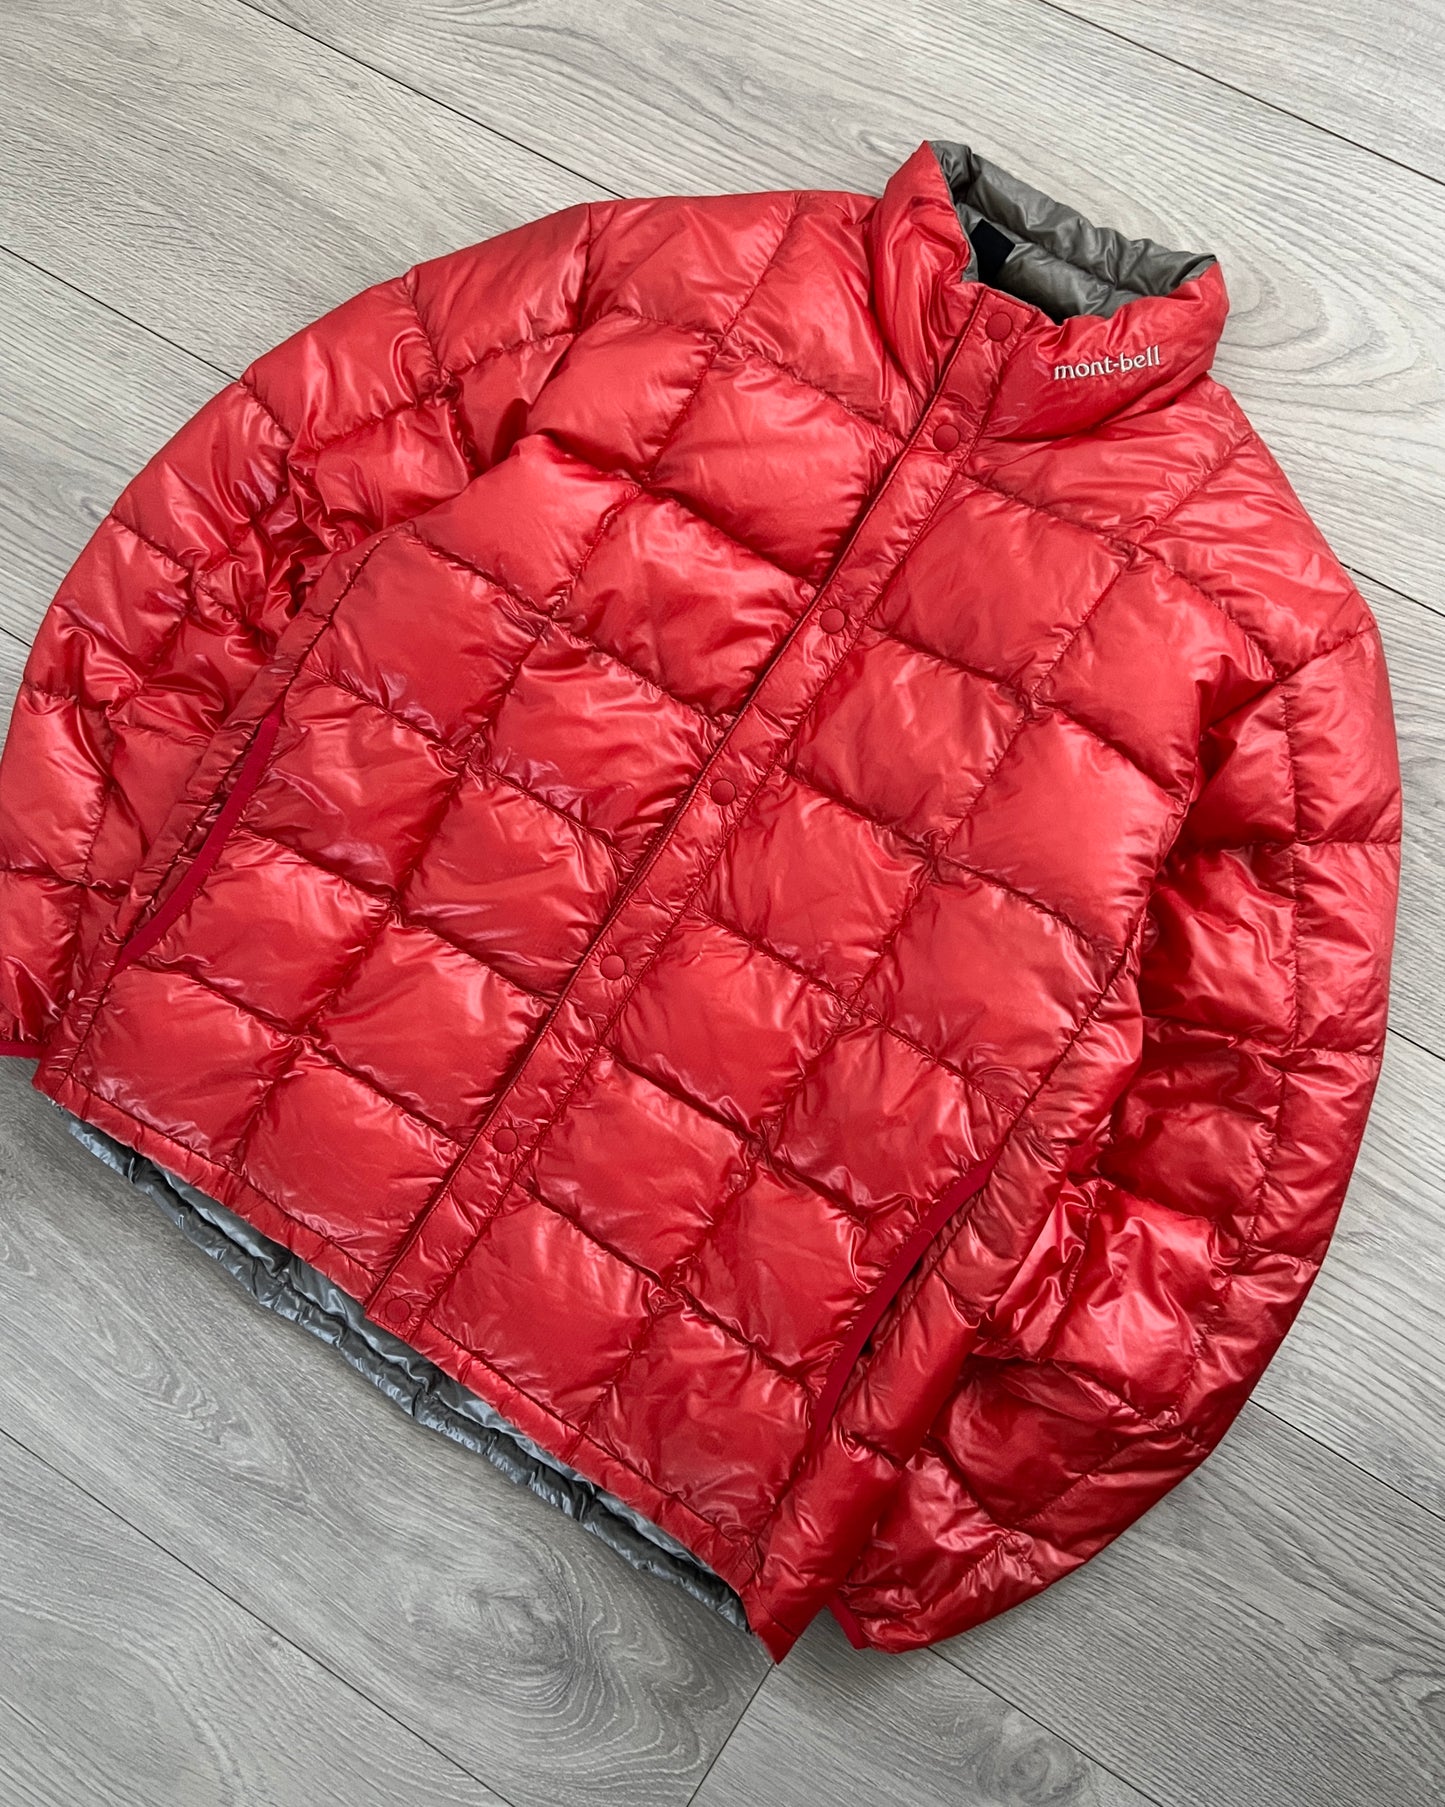 Montbell 2000s Nylon Square Stitch Snap-Front Down Jacket - Size S